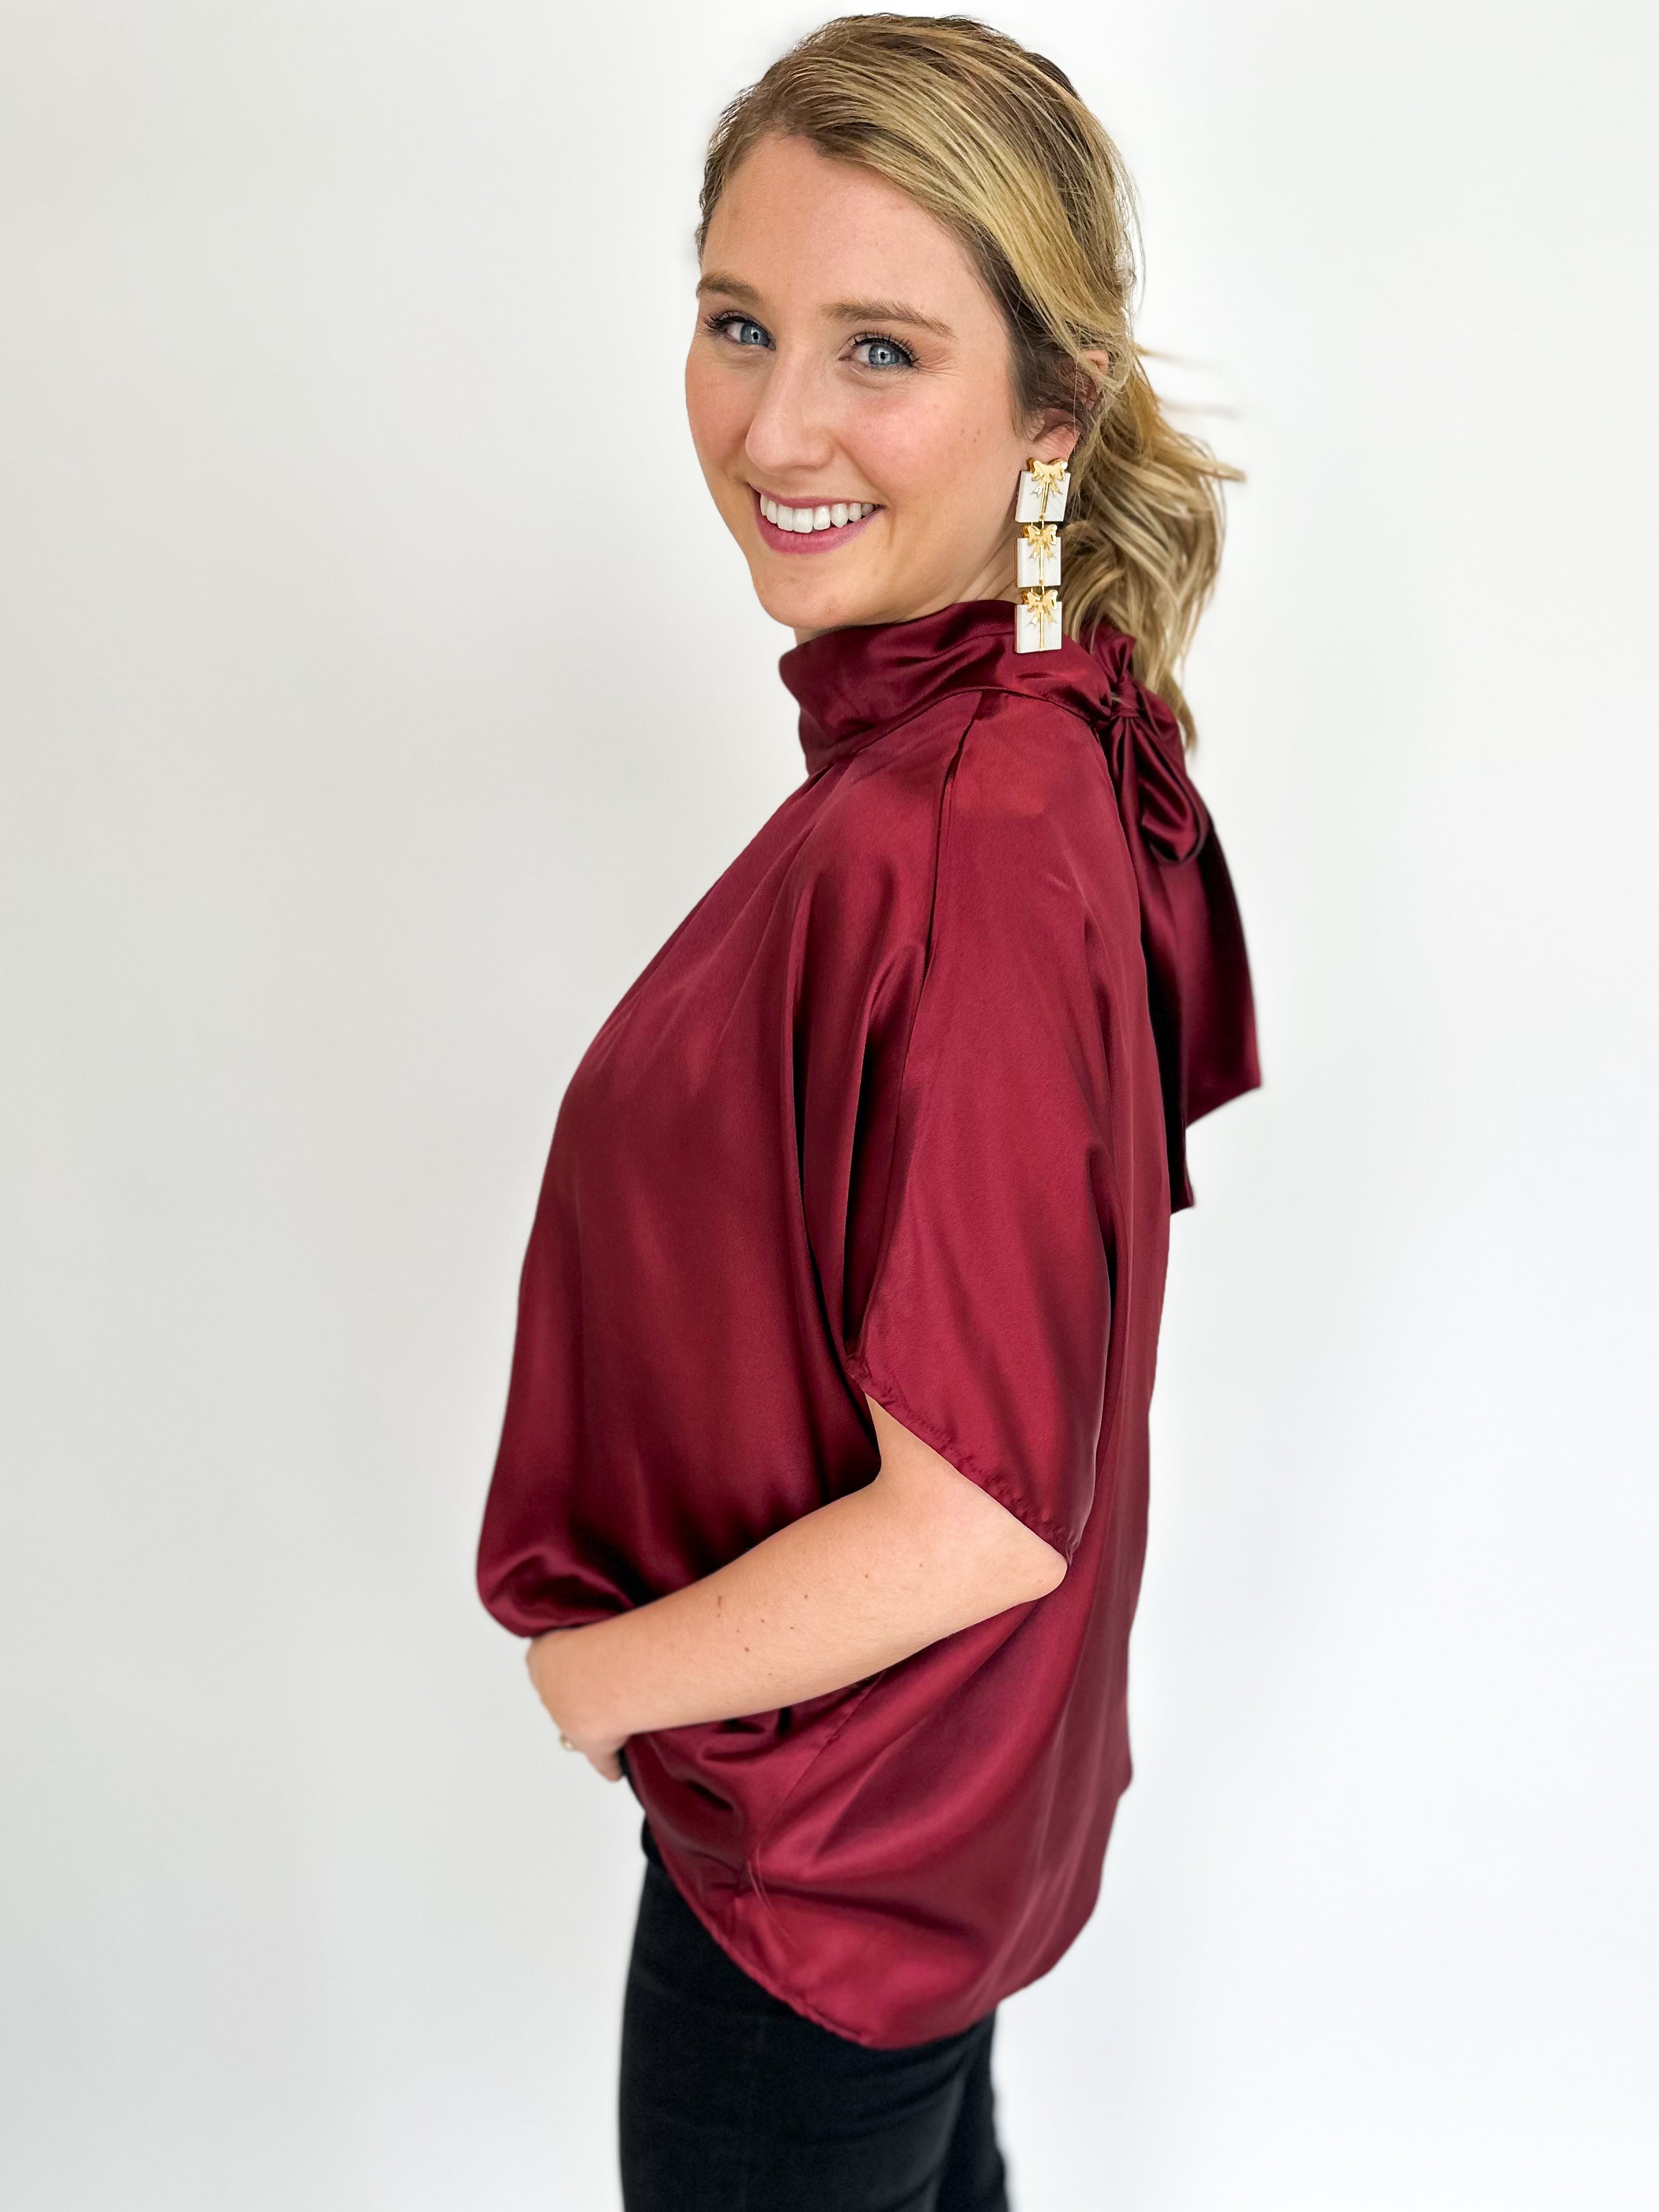 Charming Satin Blouse - Wine-200 Fashion Blouses-ADRIENNE-July & June Women's Fashion Boutique Located in San Antonio, Texas